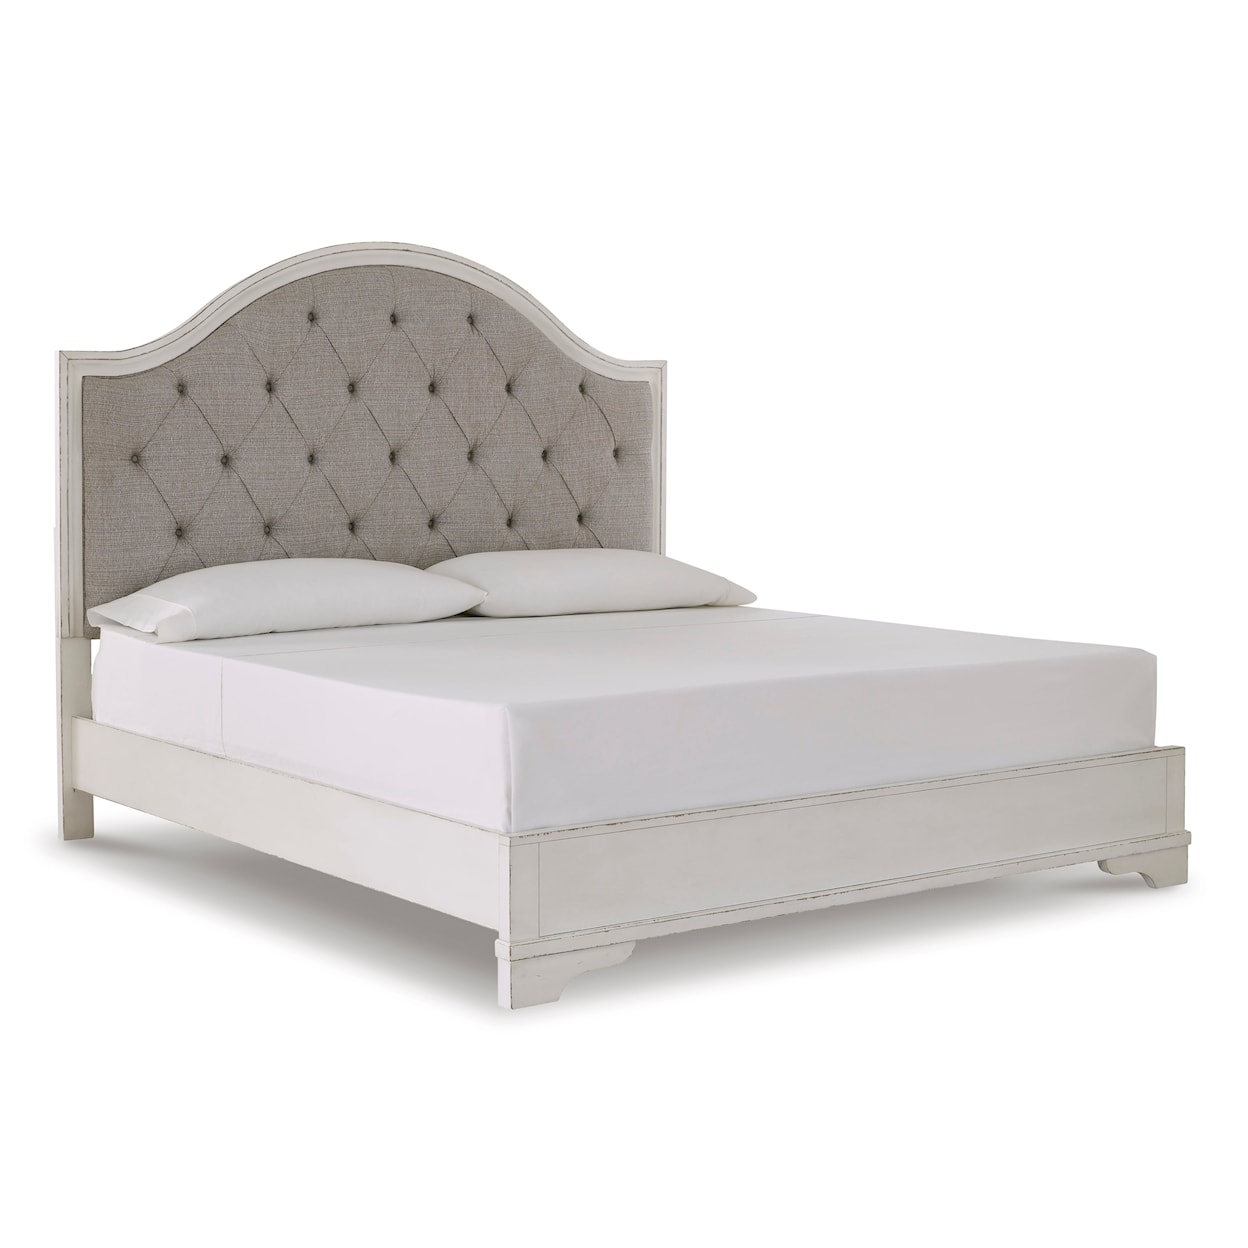 Signature Design by Ashley Brollyn King Bed